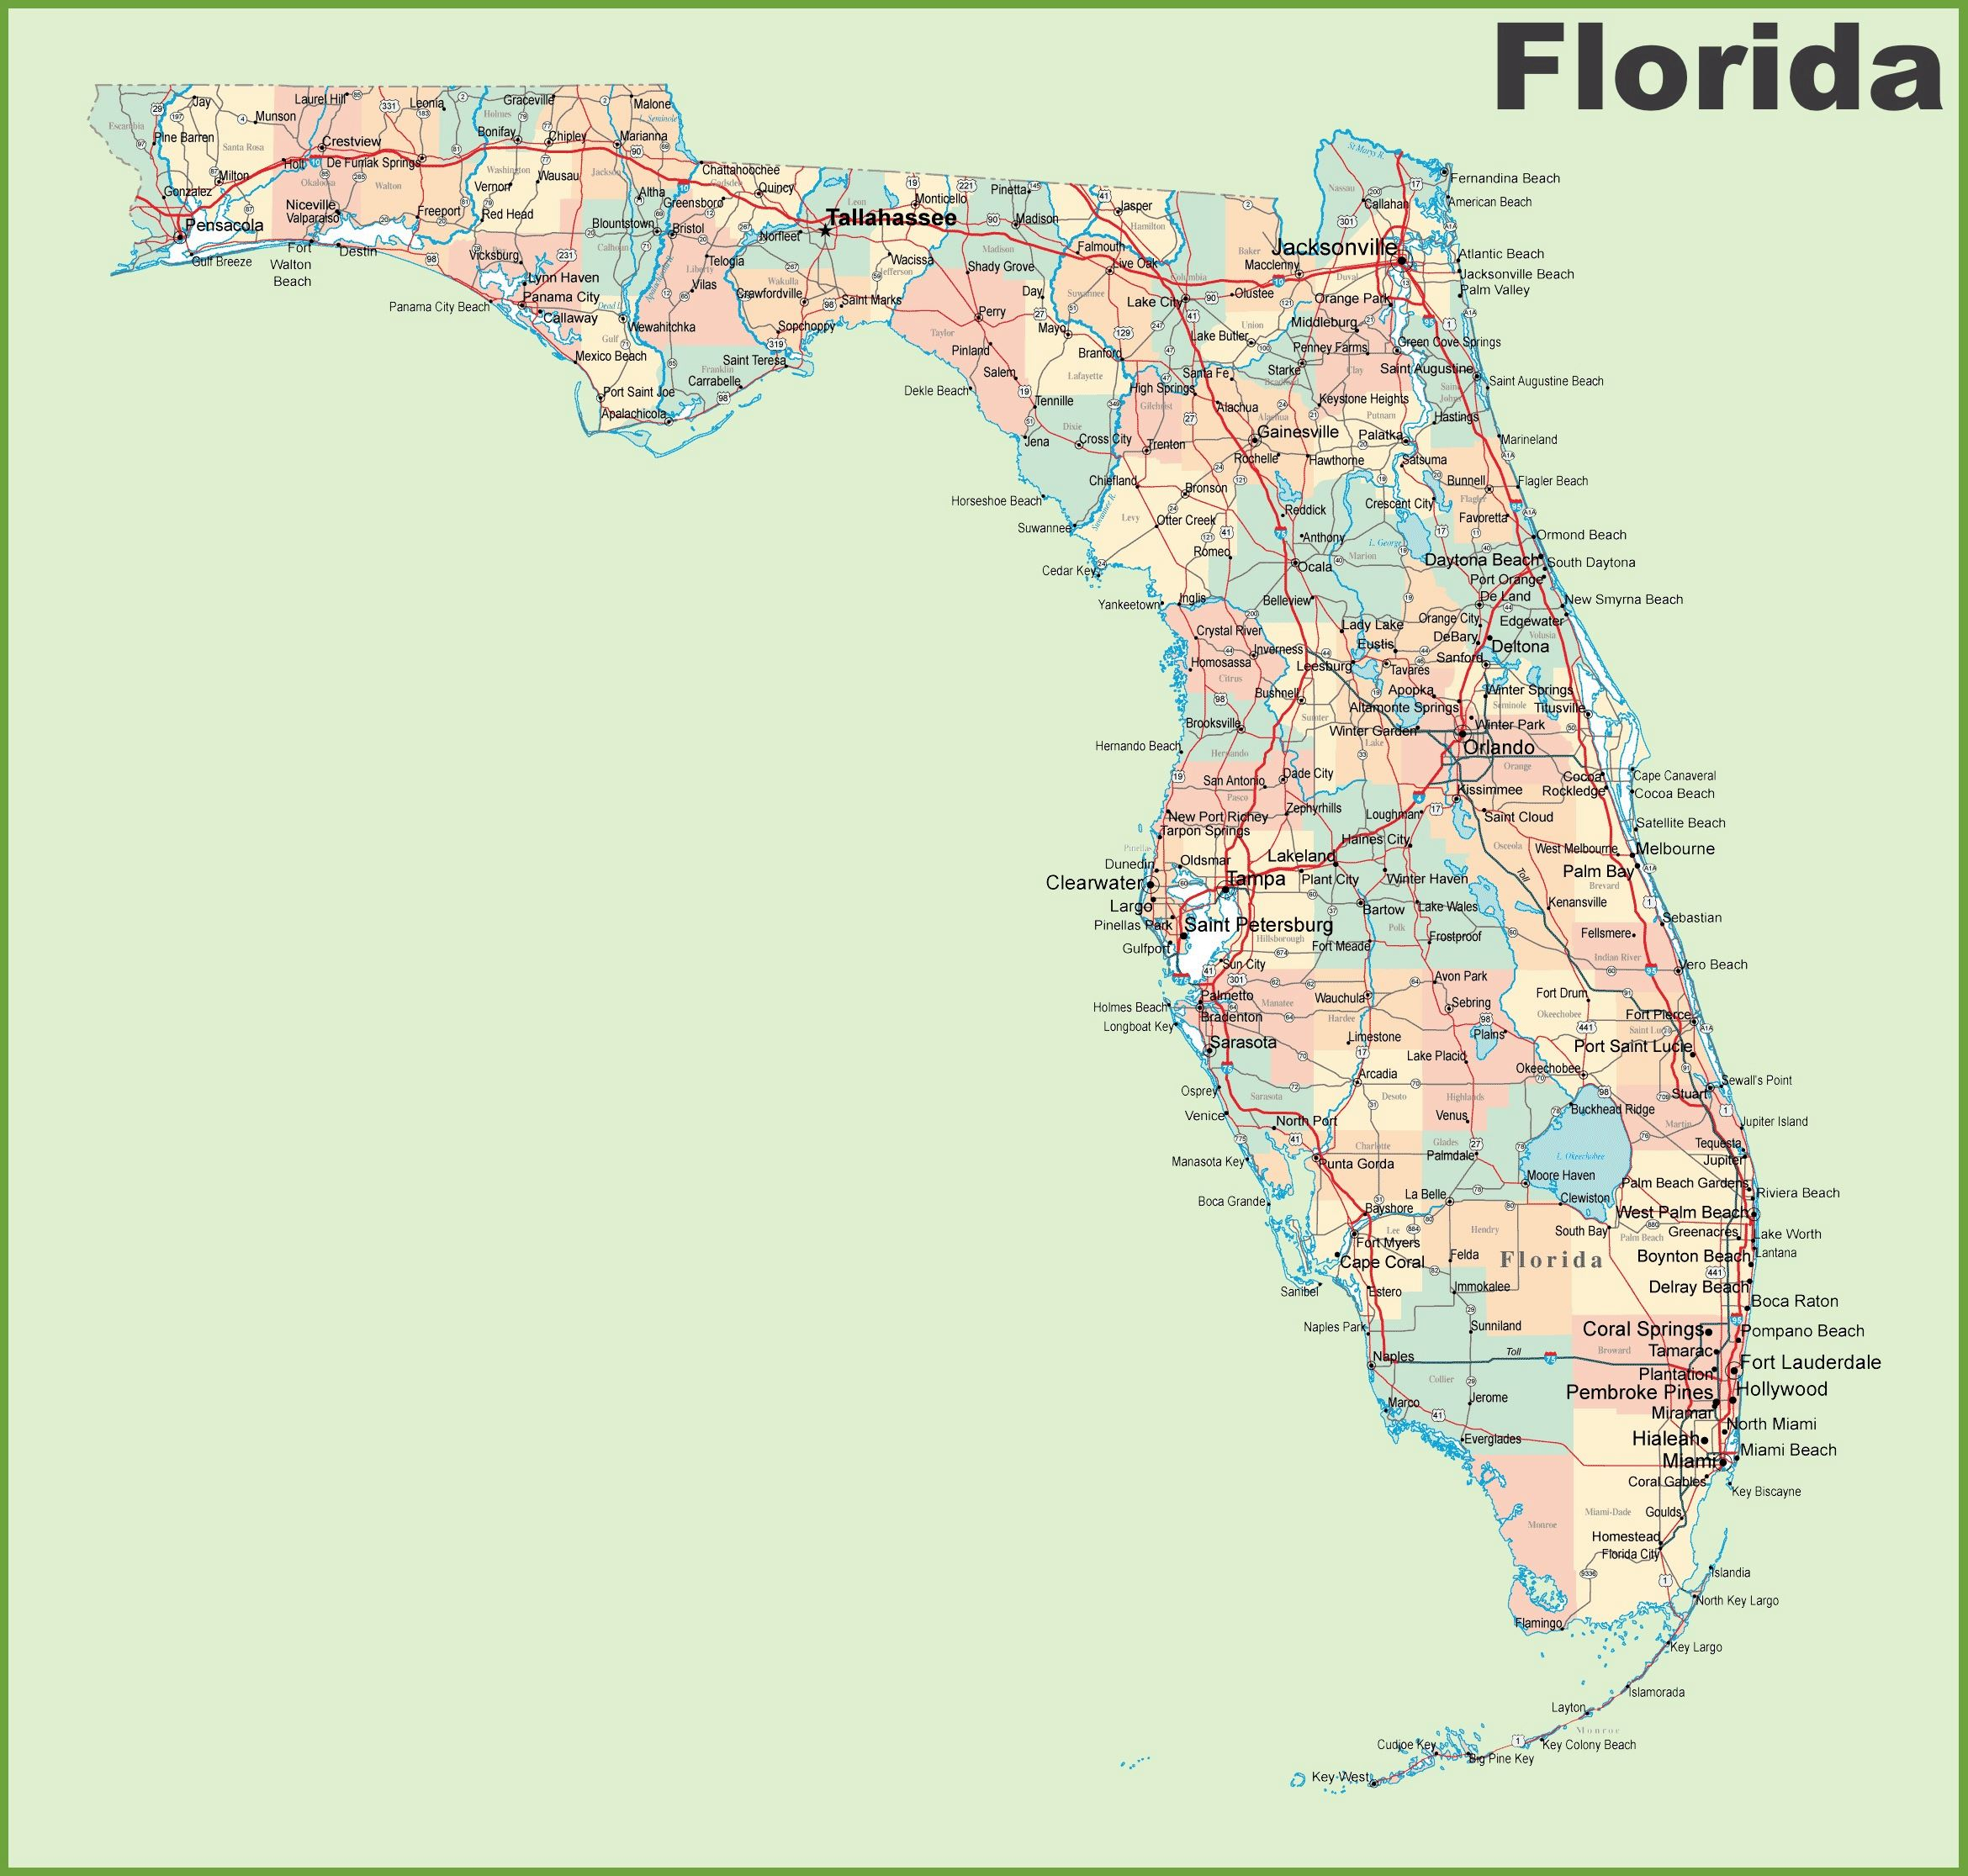 Large Florida Maps For Free Download And Print | High-Resolution And - Map Of Florida Naples Tampa